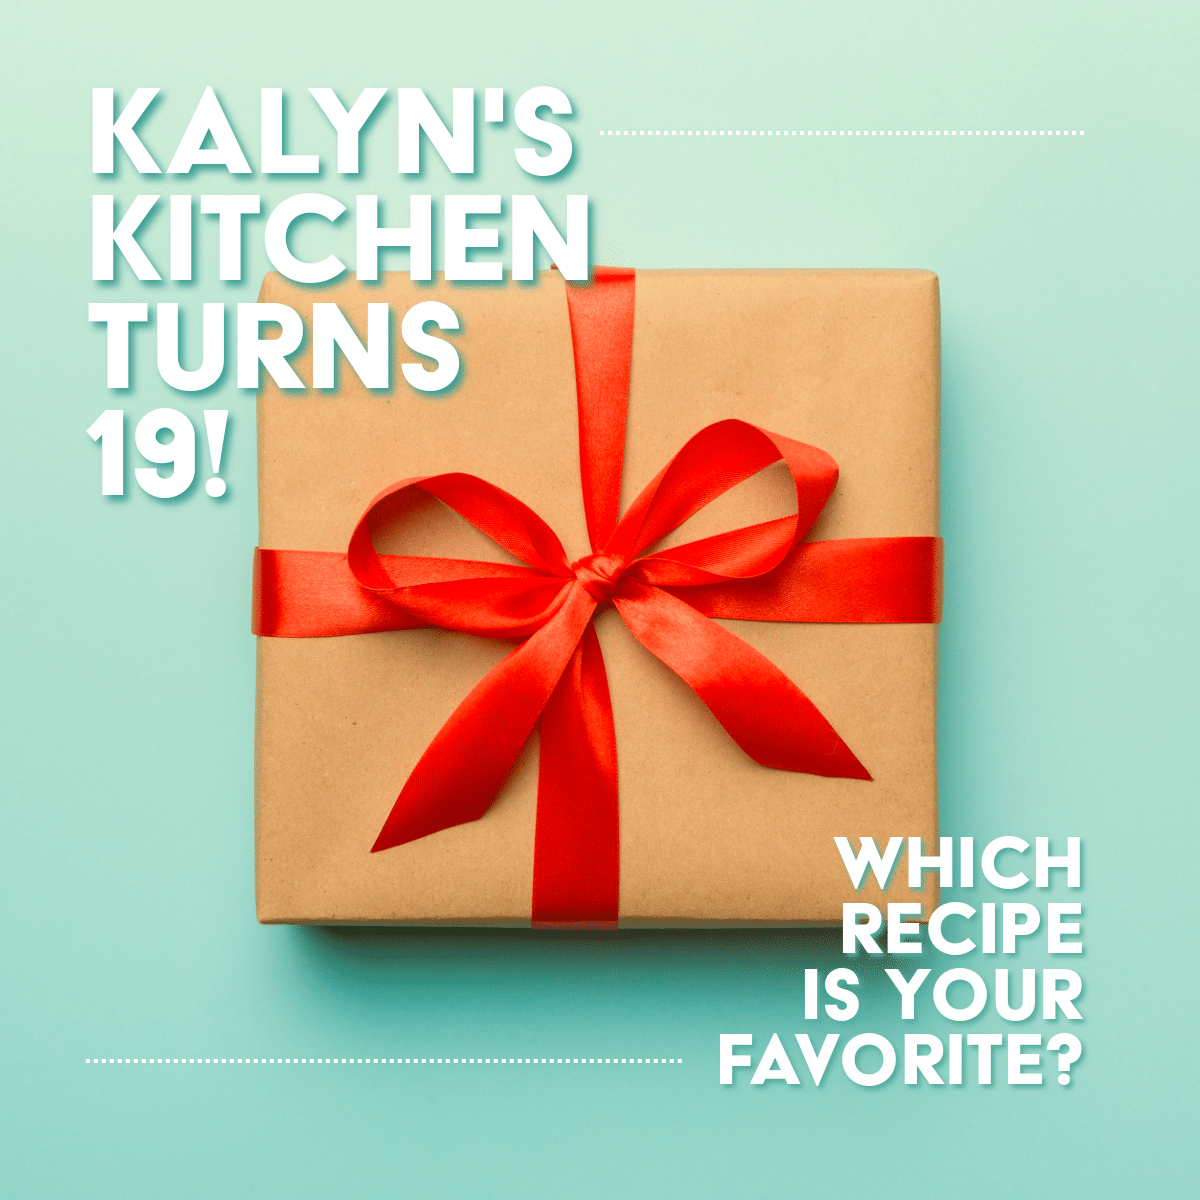 Kalyn's Kitchen Turns 19! (Which recipe is your favorite?)